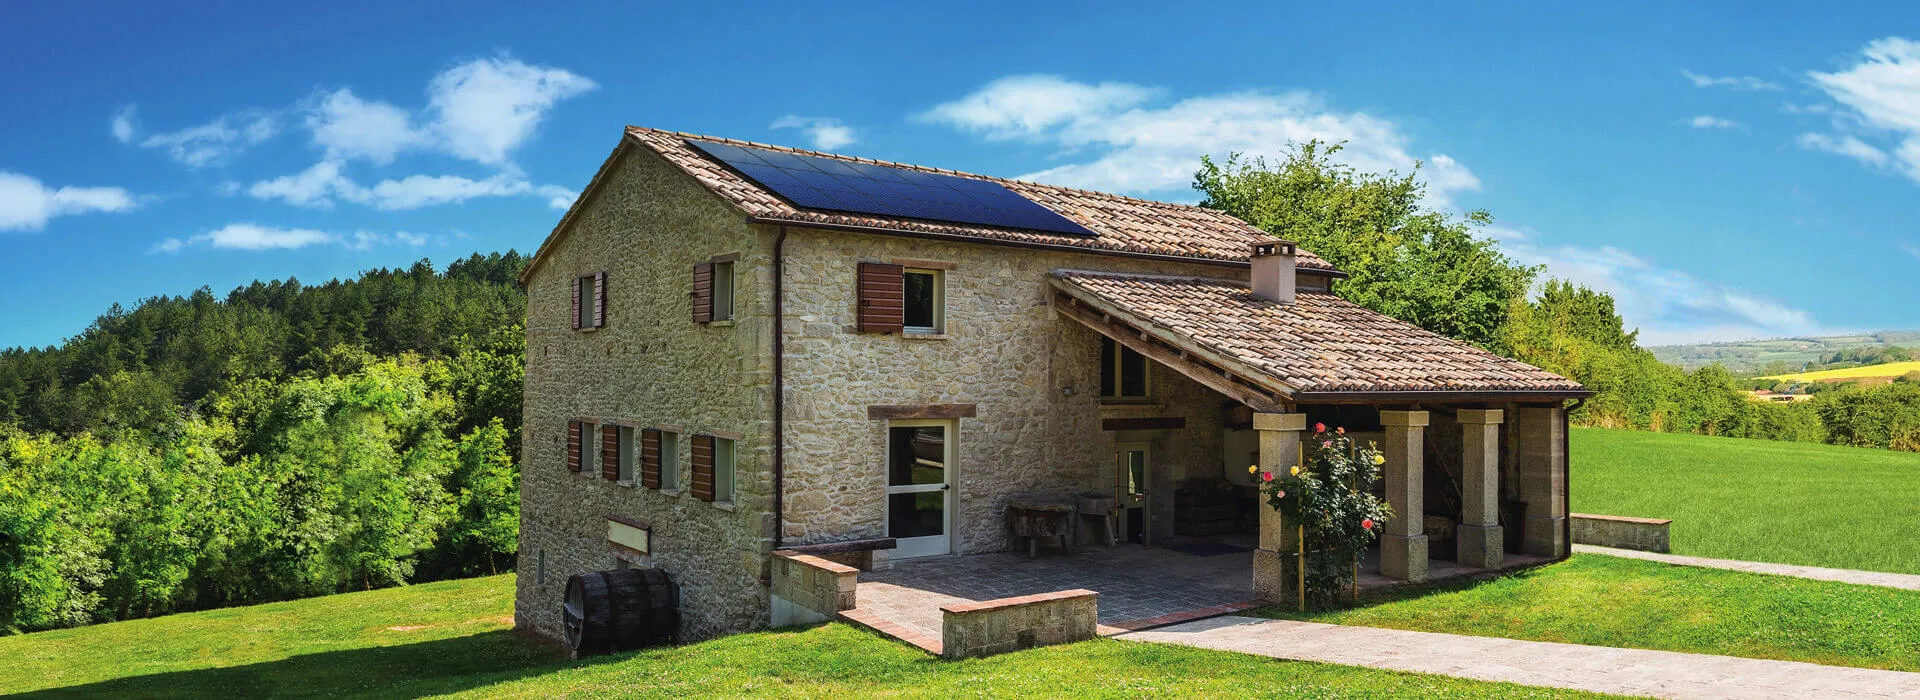 solar panels on home in Italy